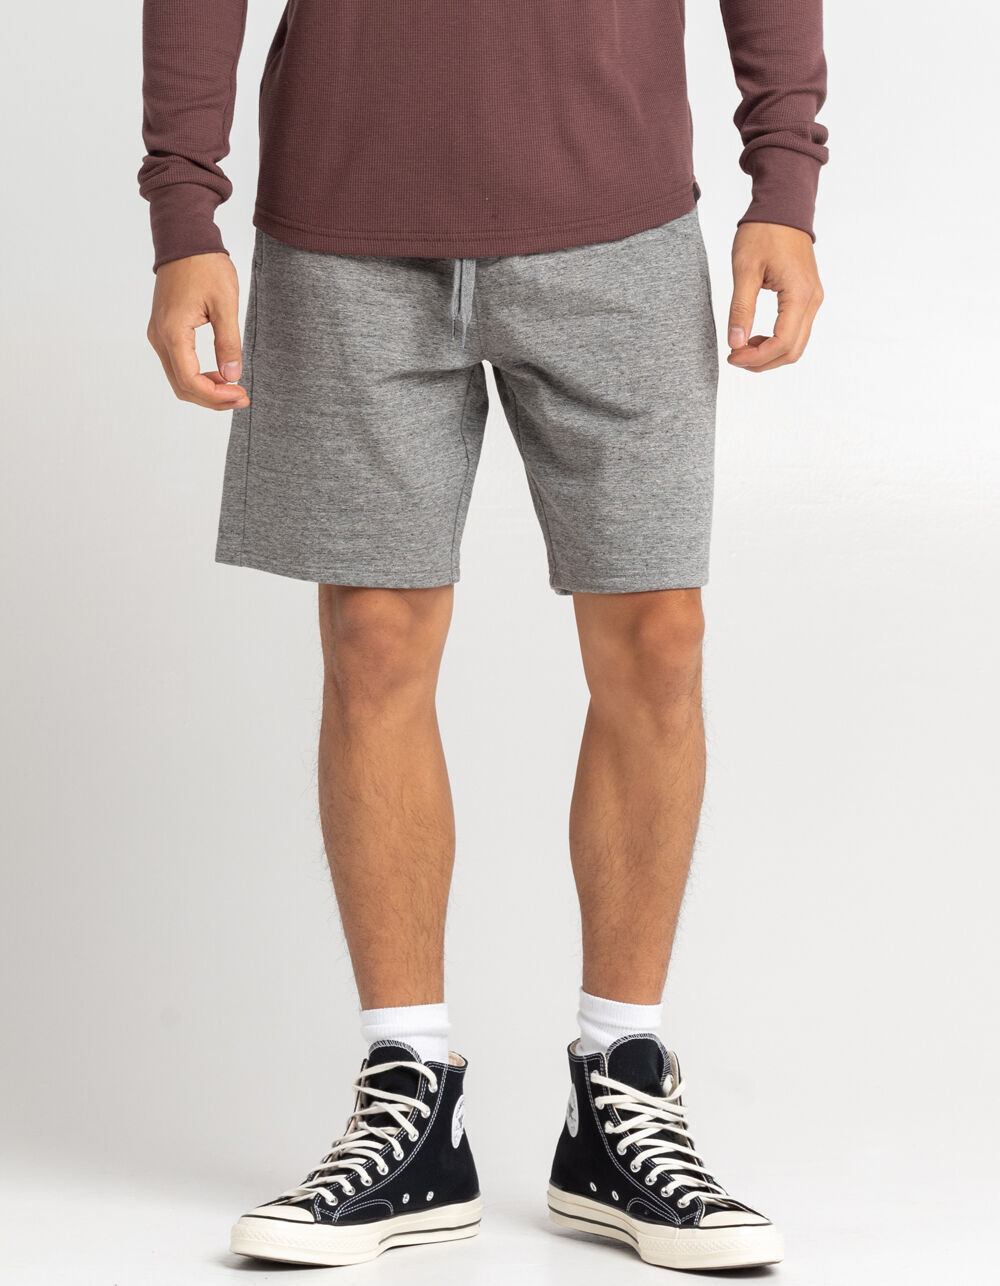 RSQ Mens Heather Gray Sweat Shorts - HEATHER GRAY | Tillys